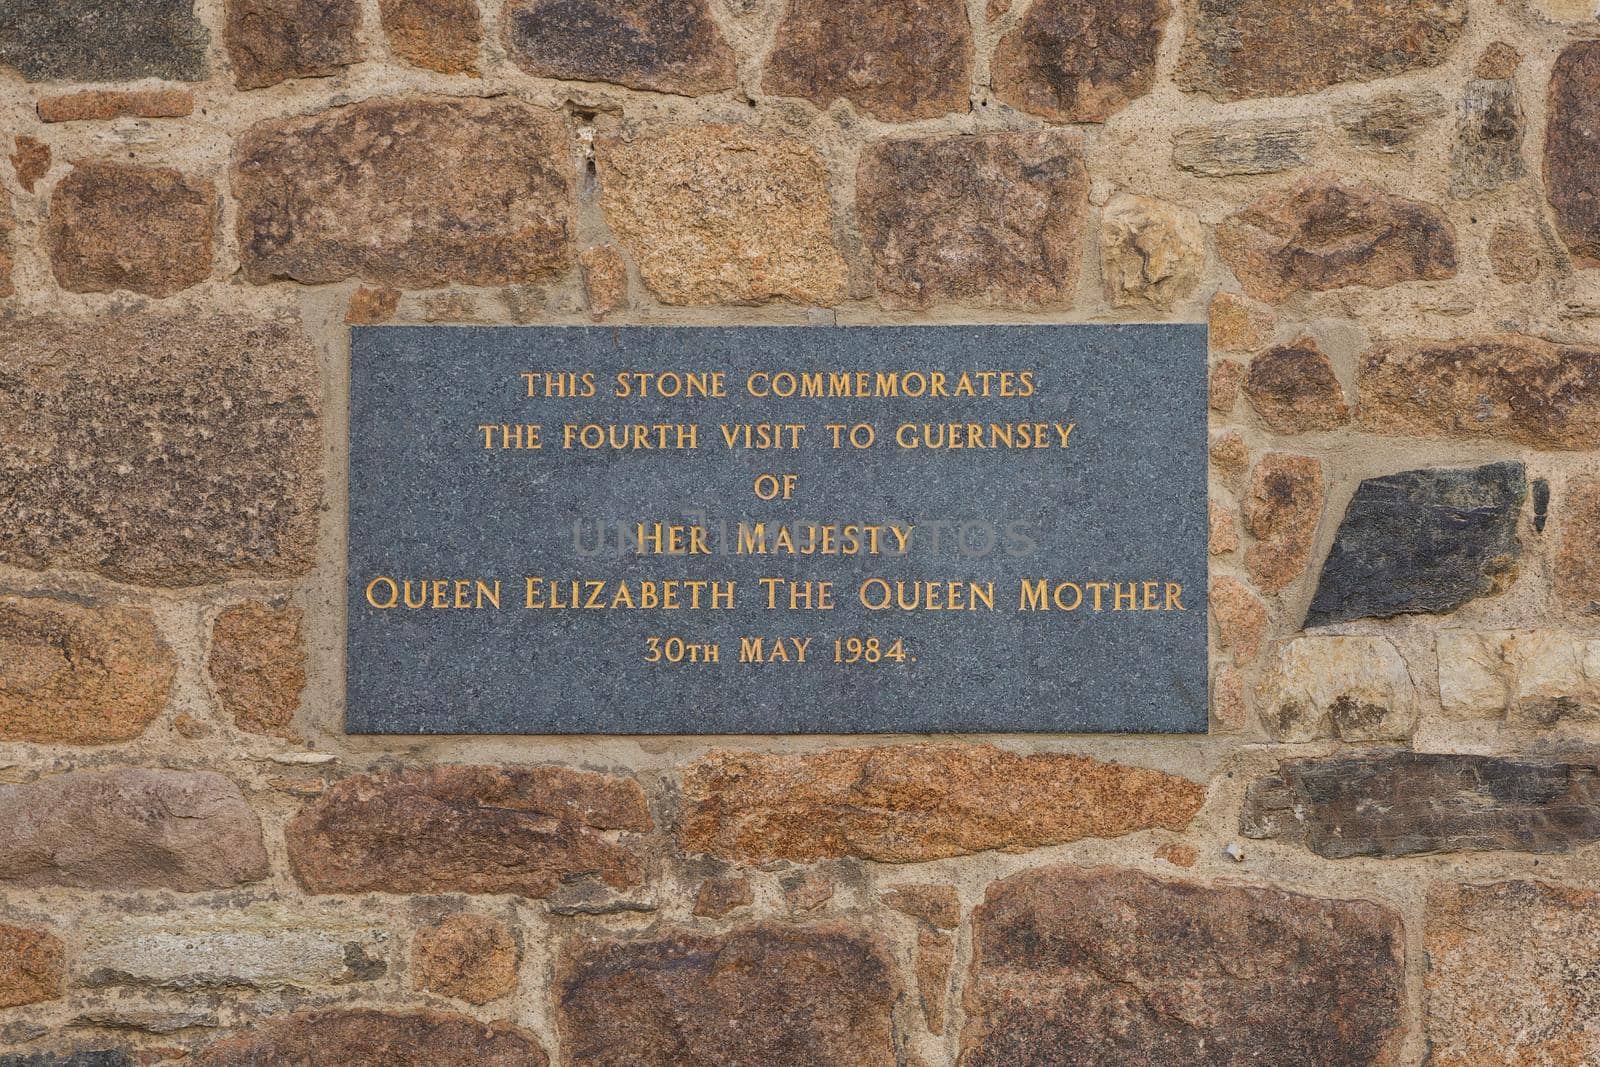 ST. PETER PORT, GUERNSEY, CHANNEL ISLANDS - AUGUST 16, 2017: Dedication to Queen Elizabeth the Queen Mother commemorating the date of her fourth visit of Guernsey.